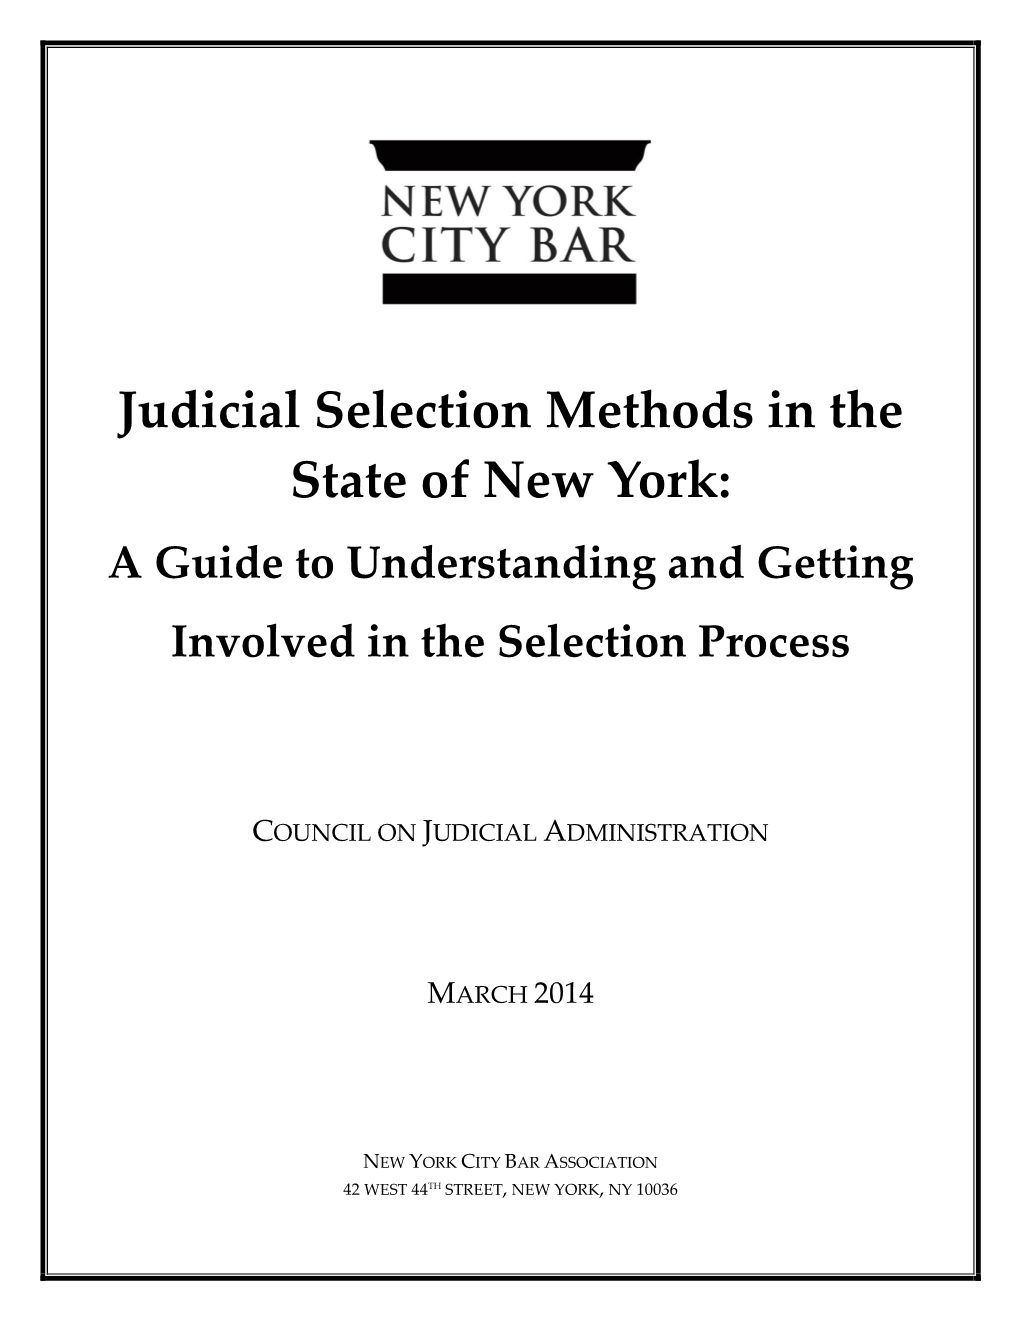 Judicial Selection Methods in the State of New York